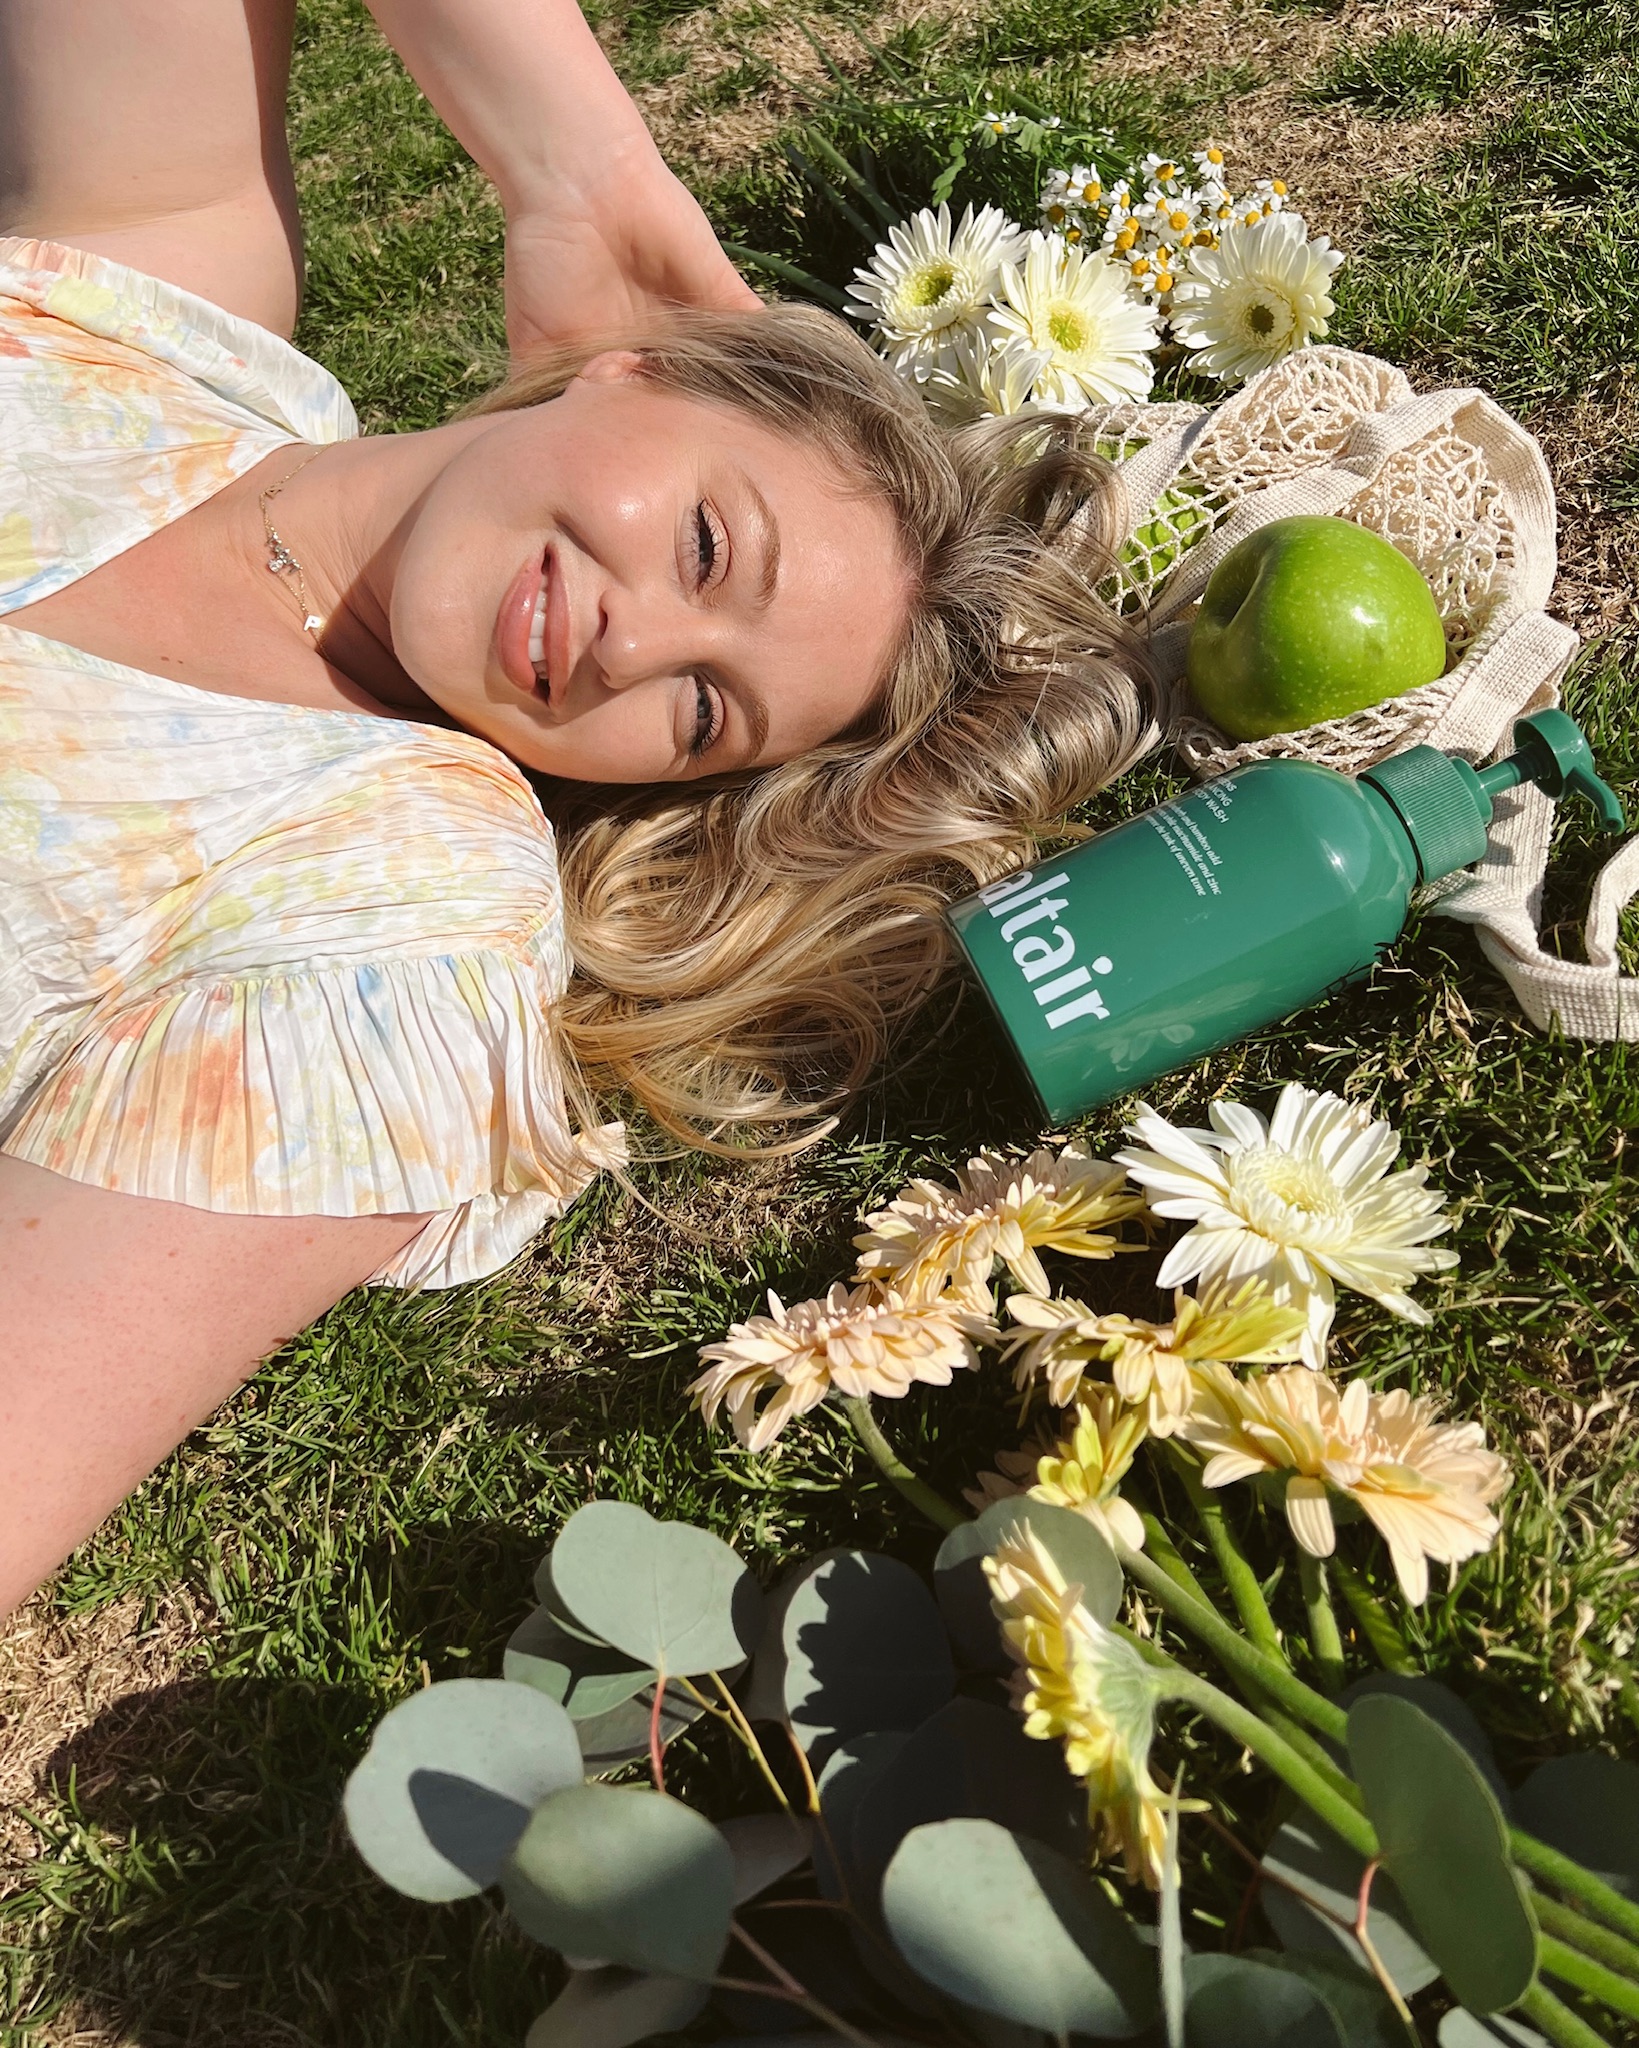 Iskra is laying down on the grass in a floral top with a Lush Greens Saltair body wash and some flowers surrounding her hair.